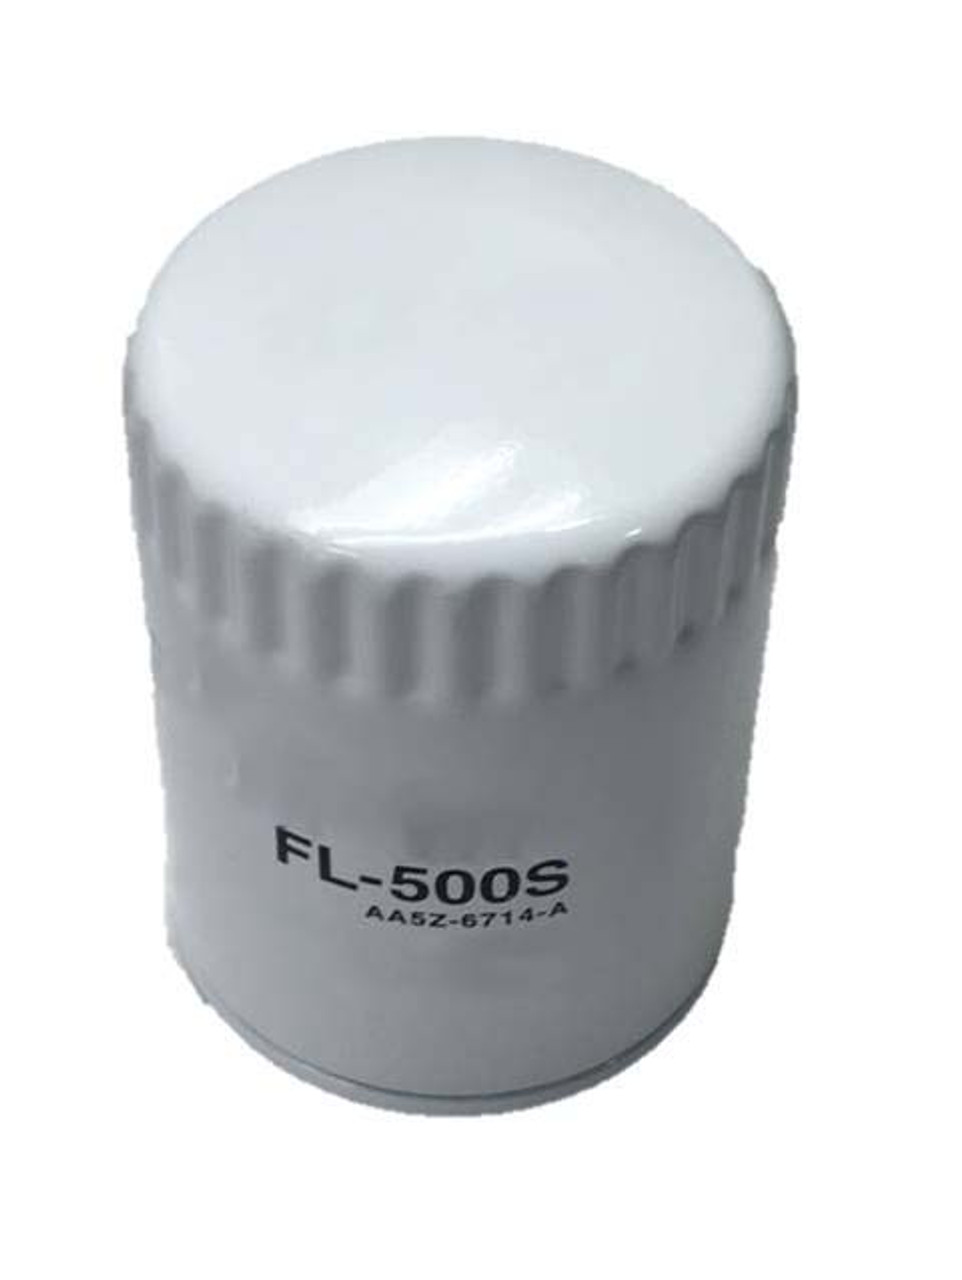 Oil Filter. Replacement For No. FL-500S